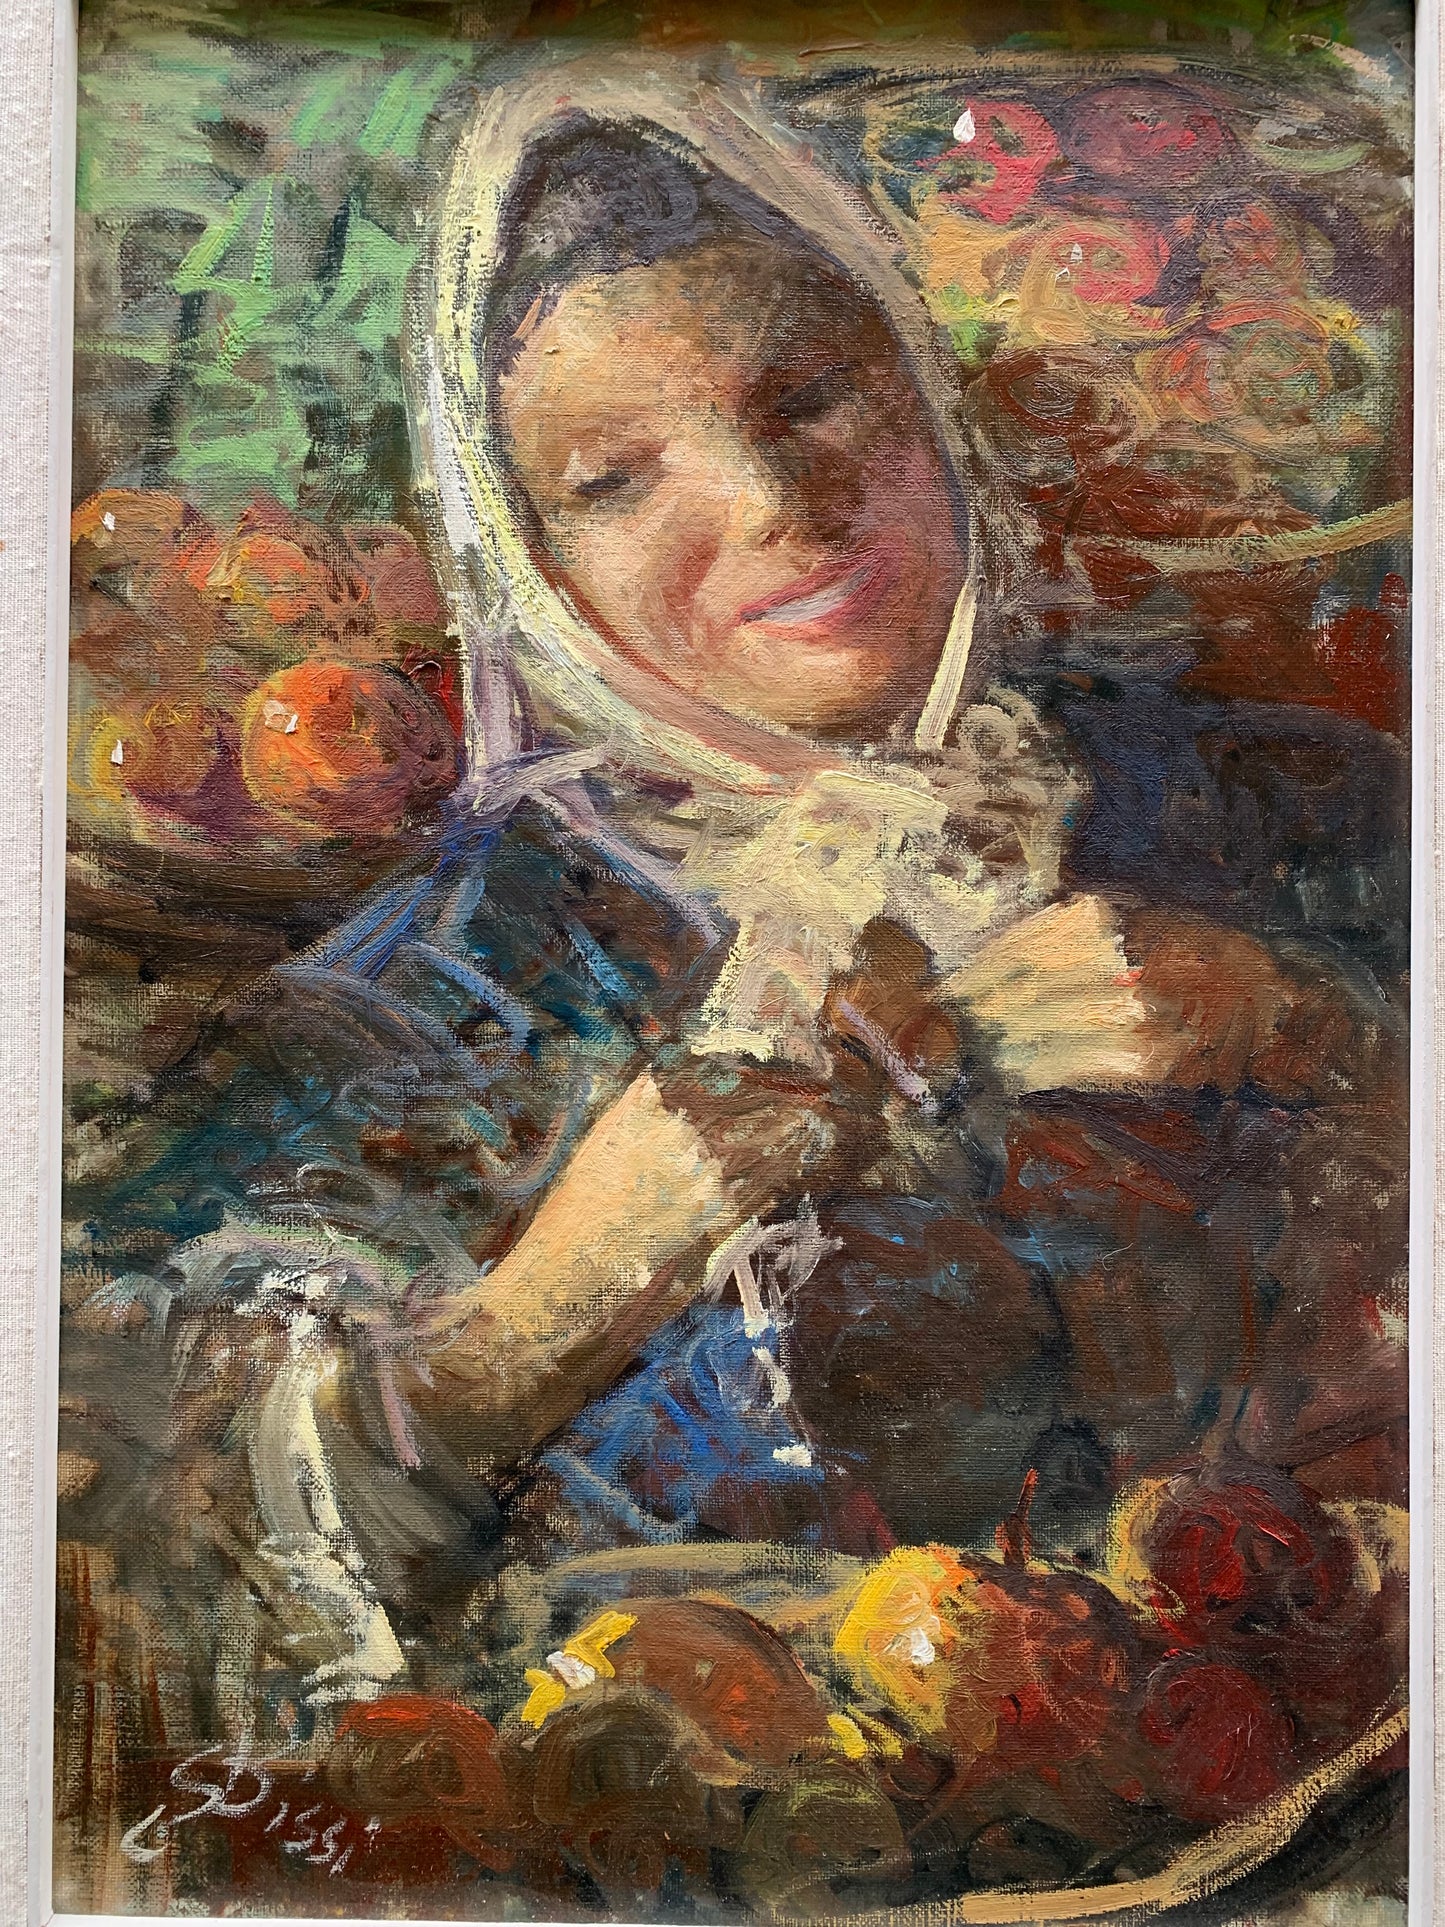 Girl with fruit. Market. Year 1958. Signed Sergio Cirno Bissi (Carmignano, 1902 - Florence, 1987).